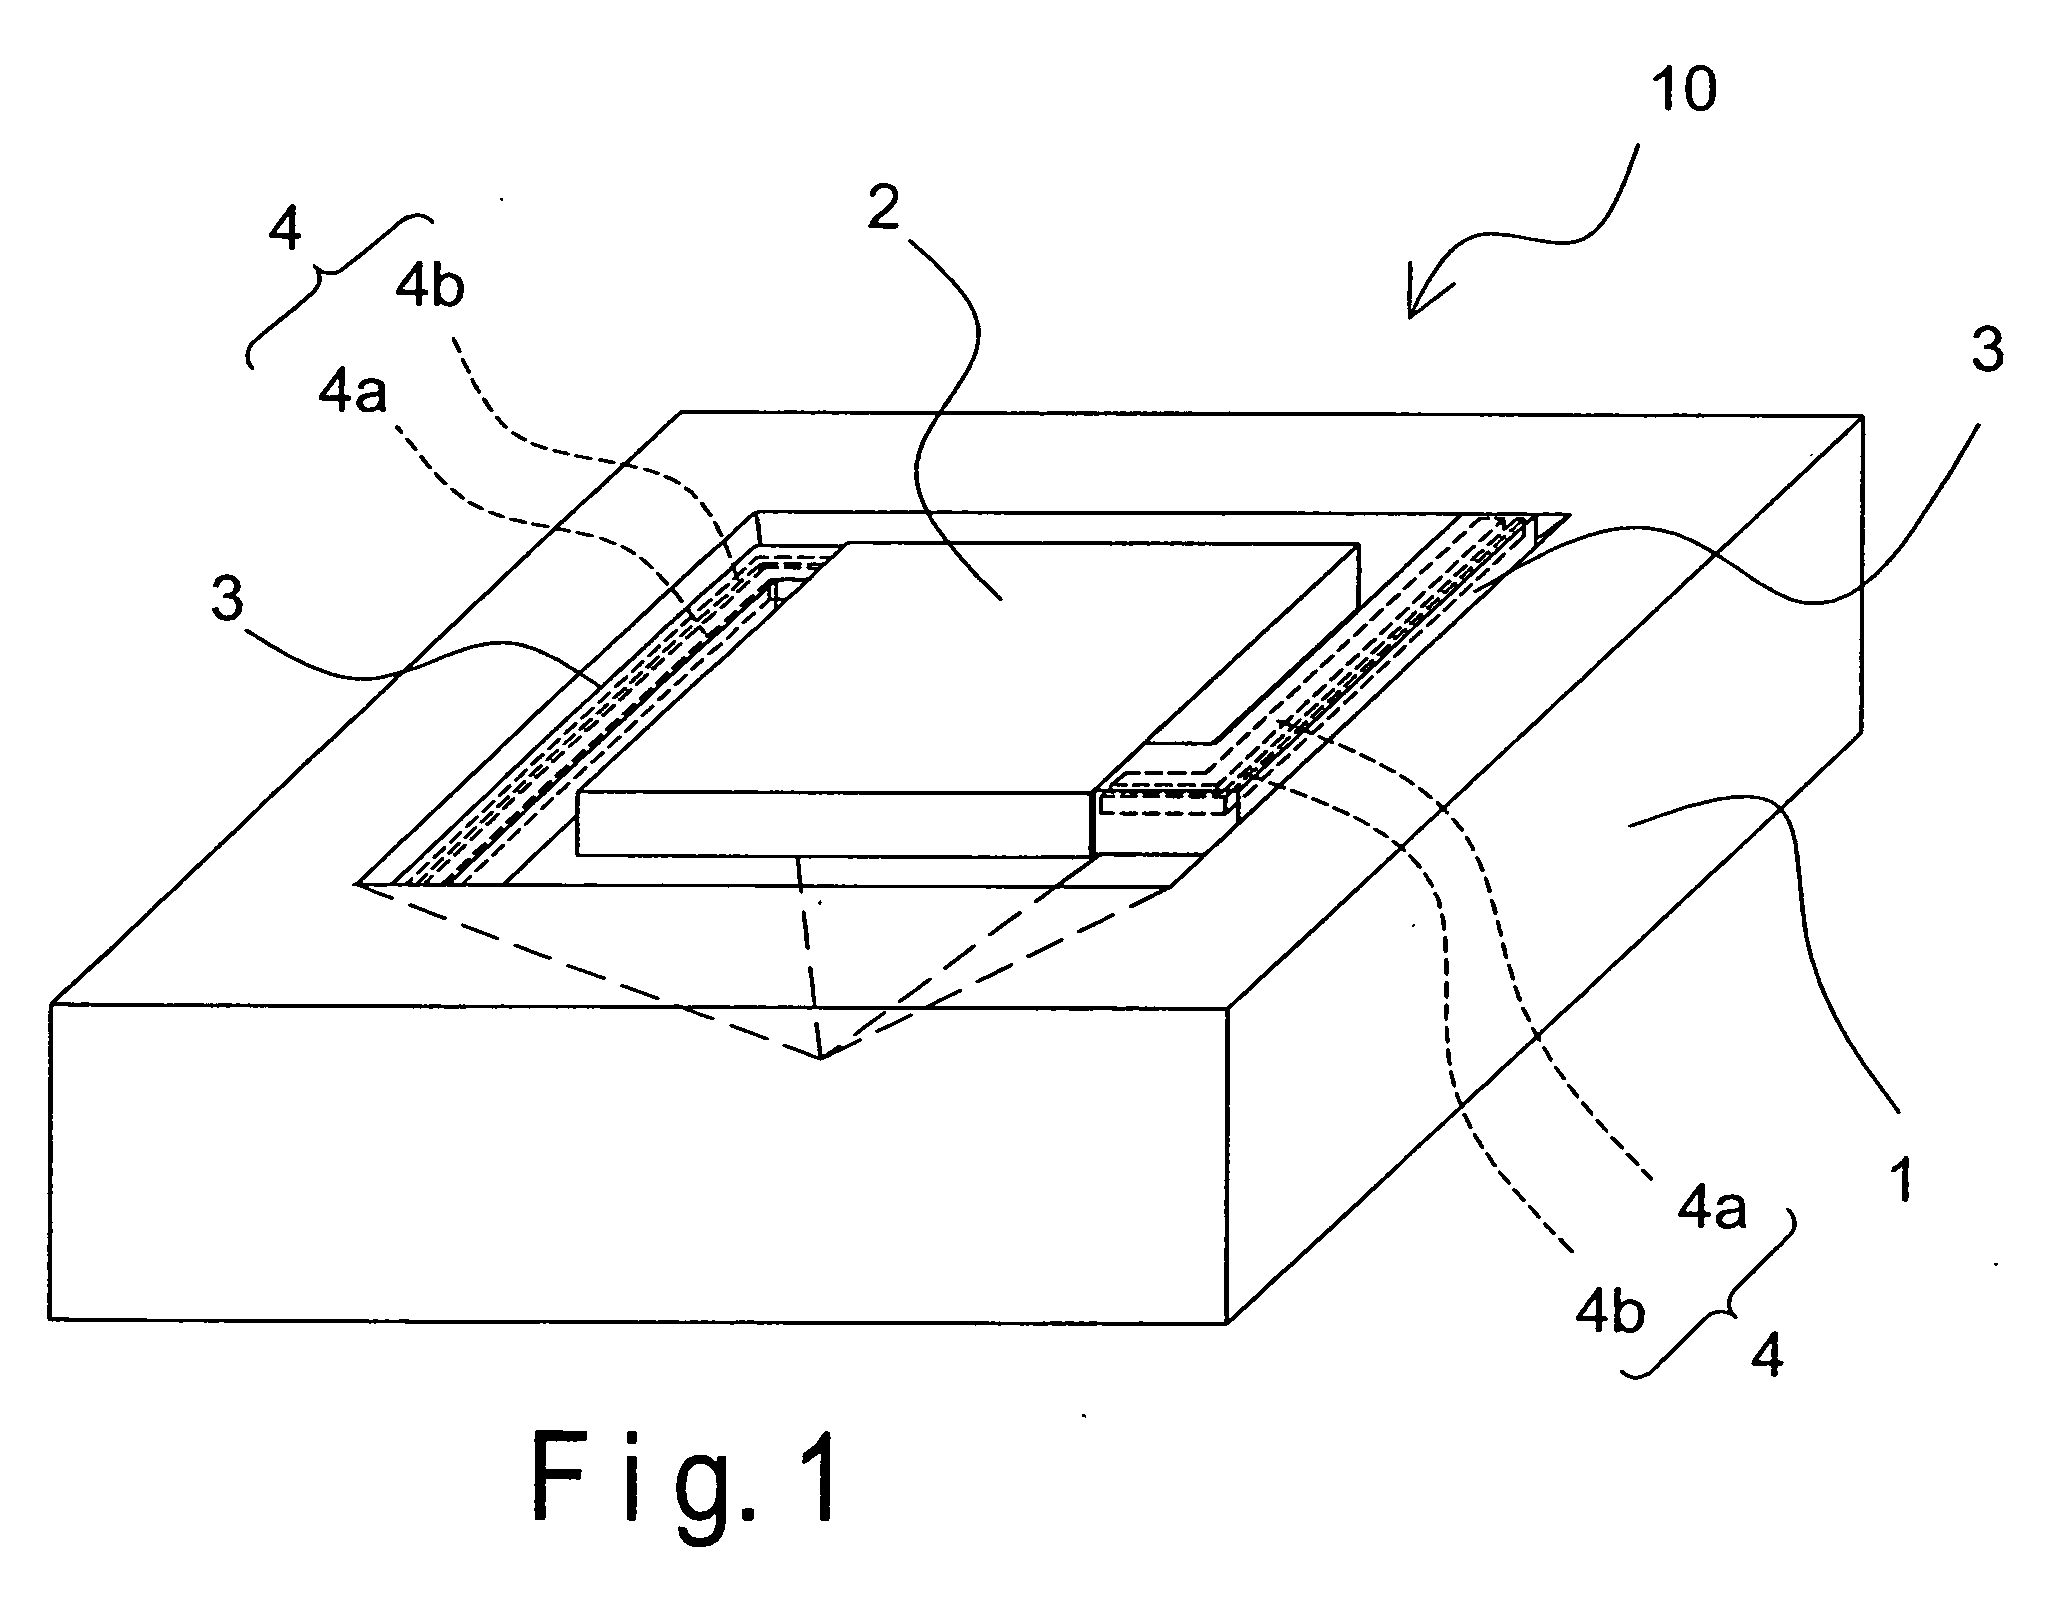 Infrared radiation detecting device